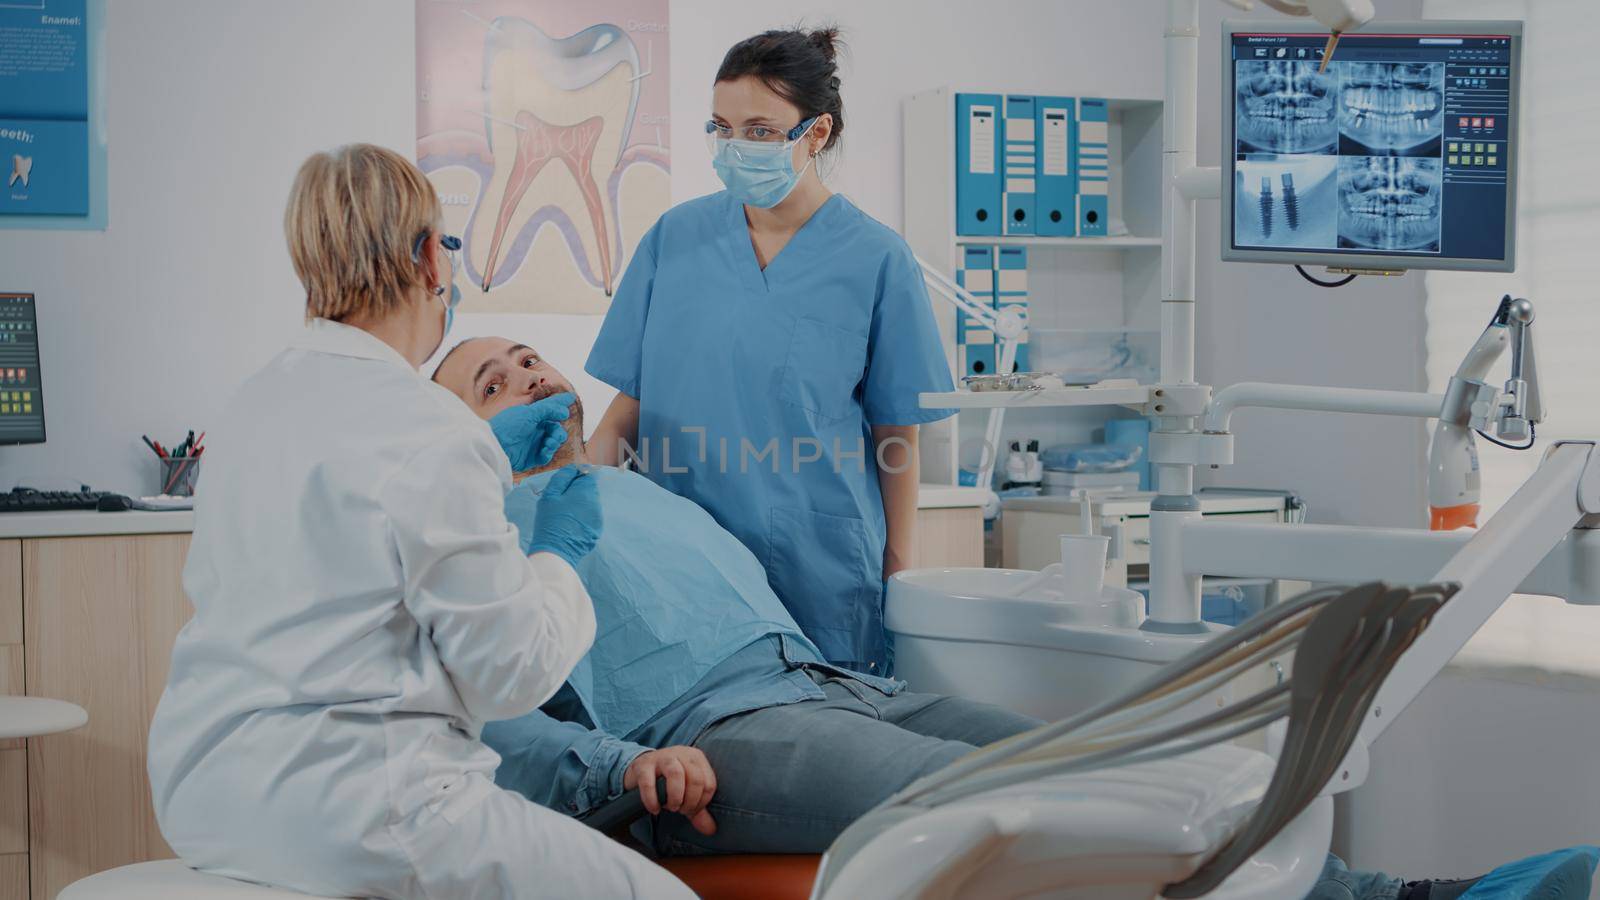 Dentist doing oral care examination on patient with toothache by DCStudio